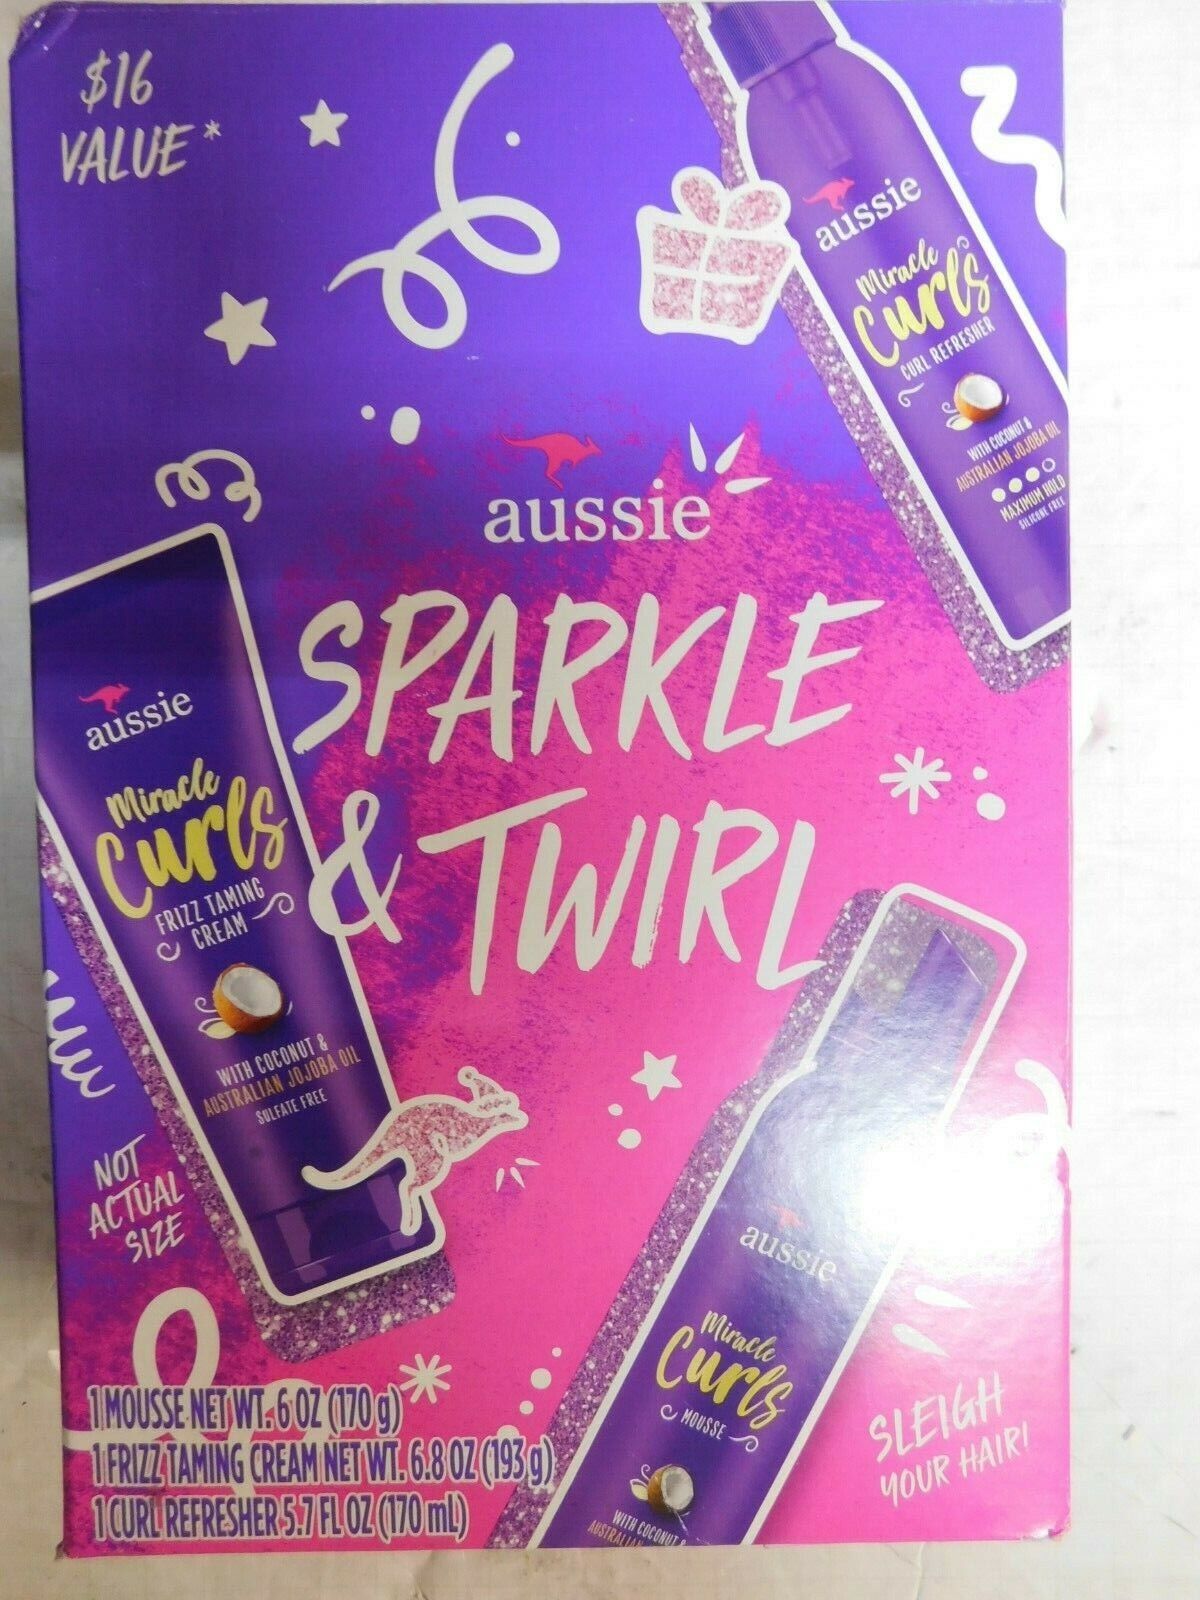 Aussie Miracle Curls Hair Care Gift Set -Sparkle & Twirl